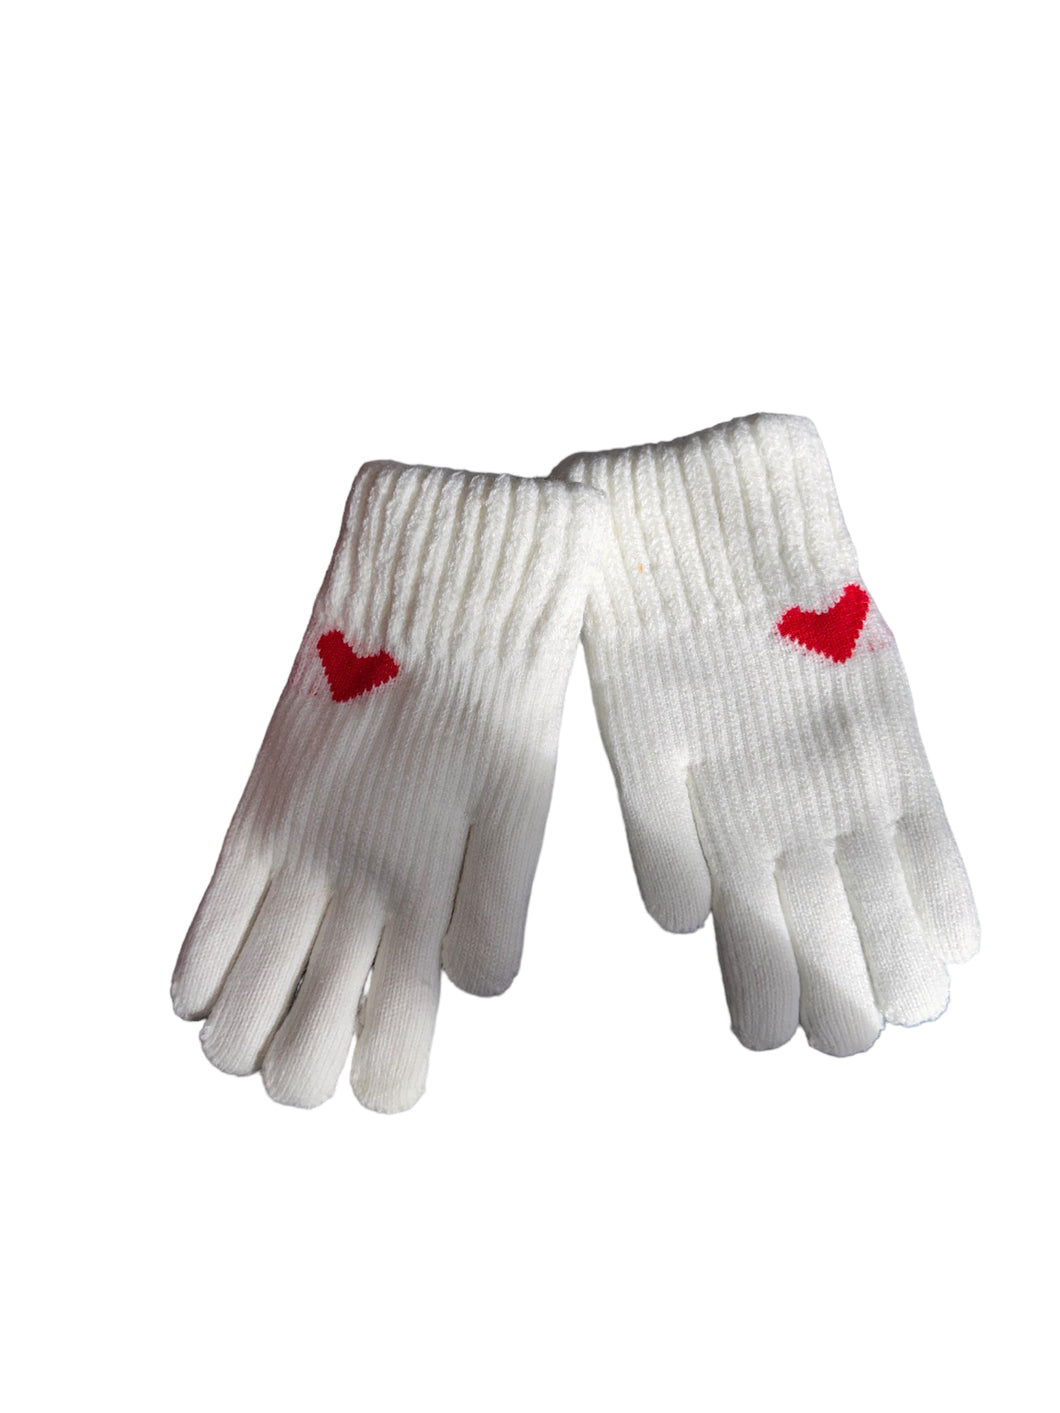 Cream Knitted Gloves W/ Red Hearts